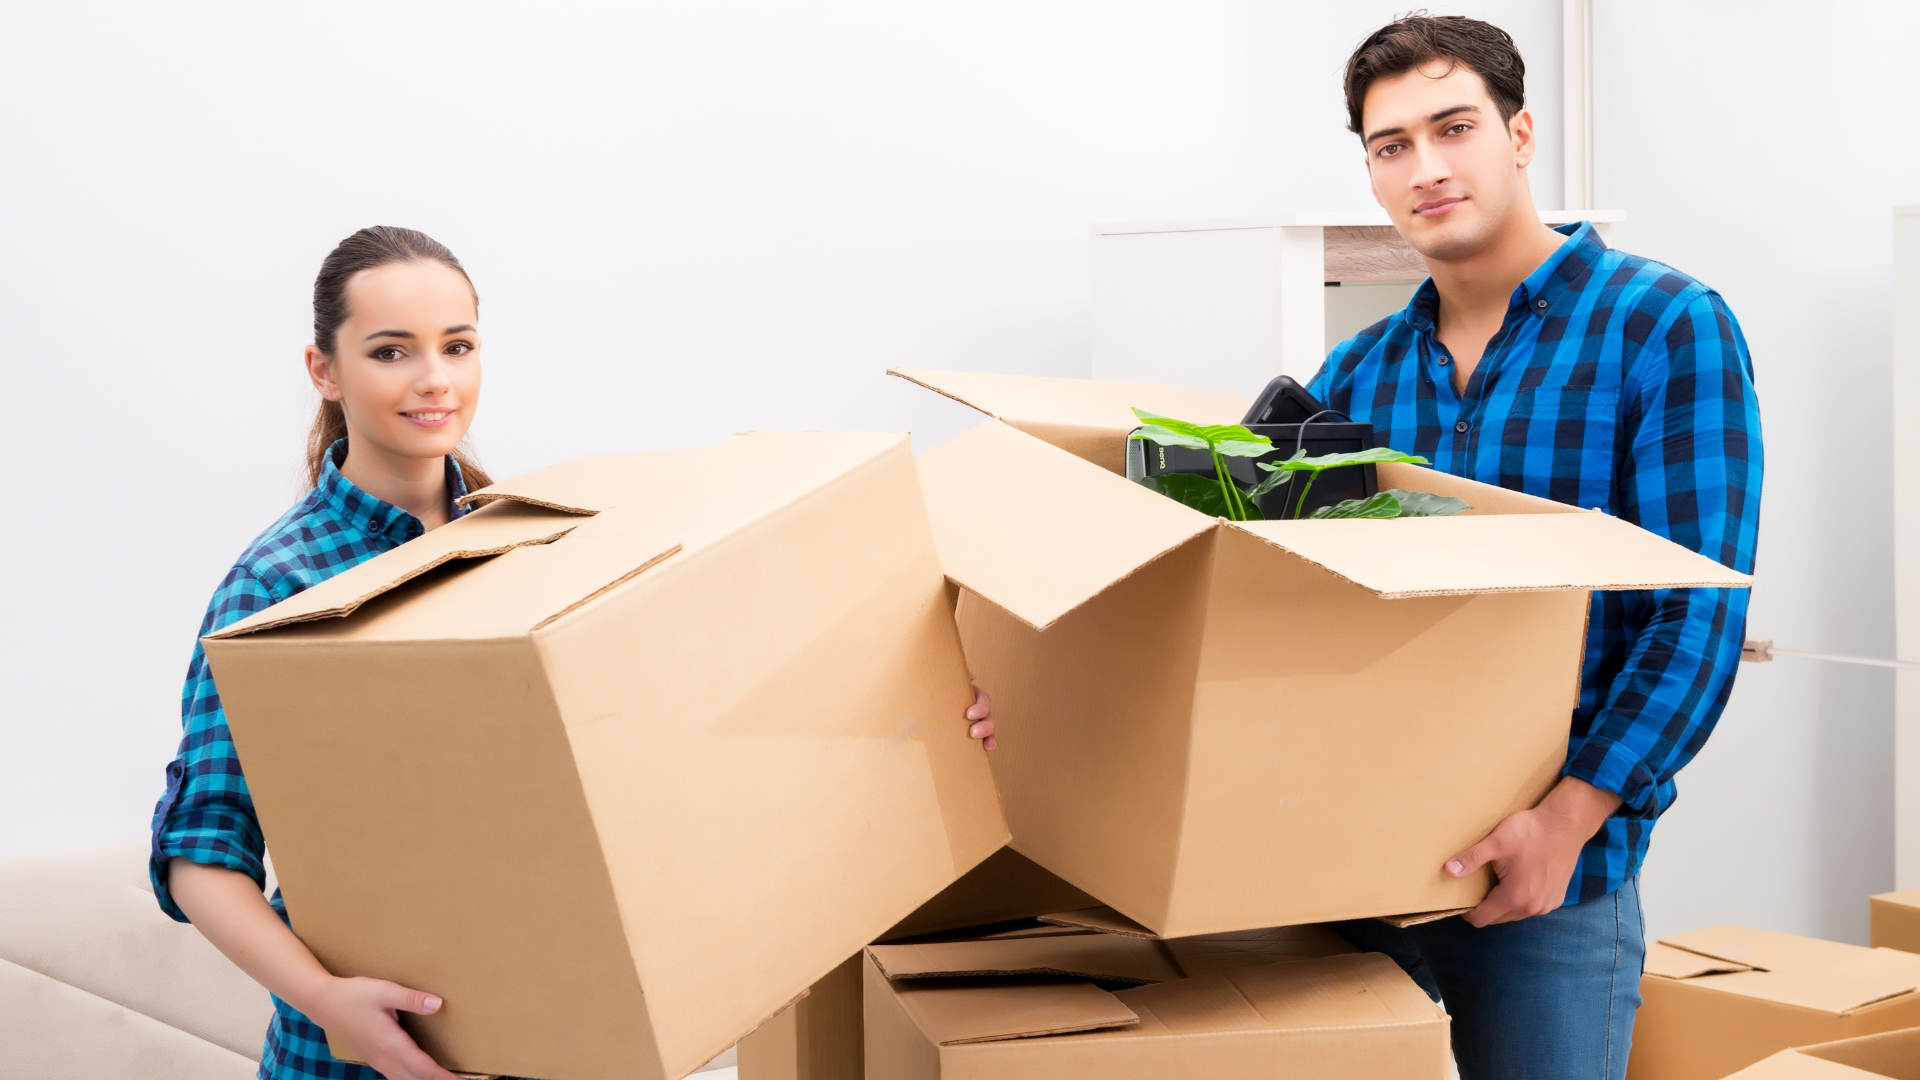 What's the Best Approach to Unpacking and Settling Into a New Home? 